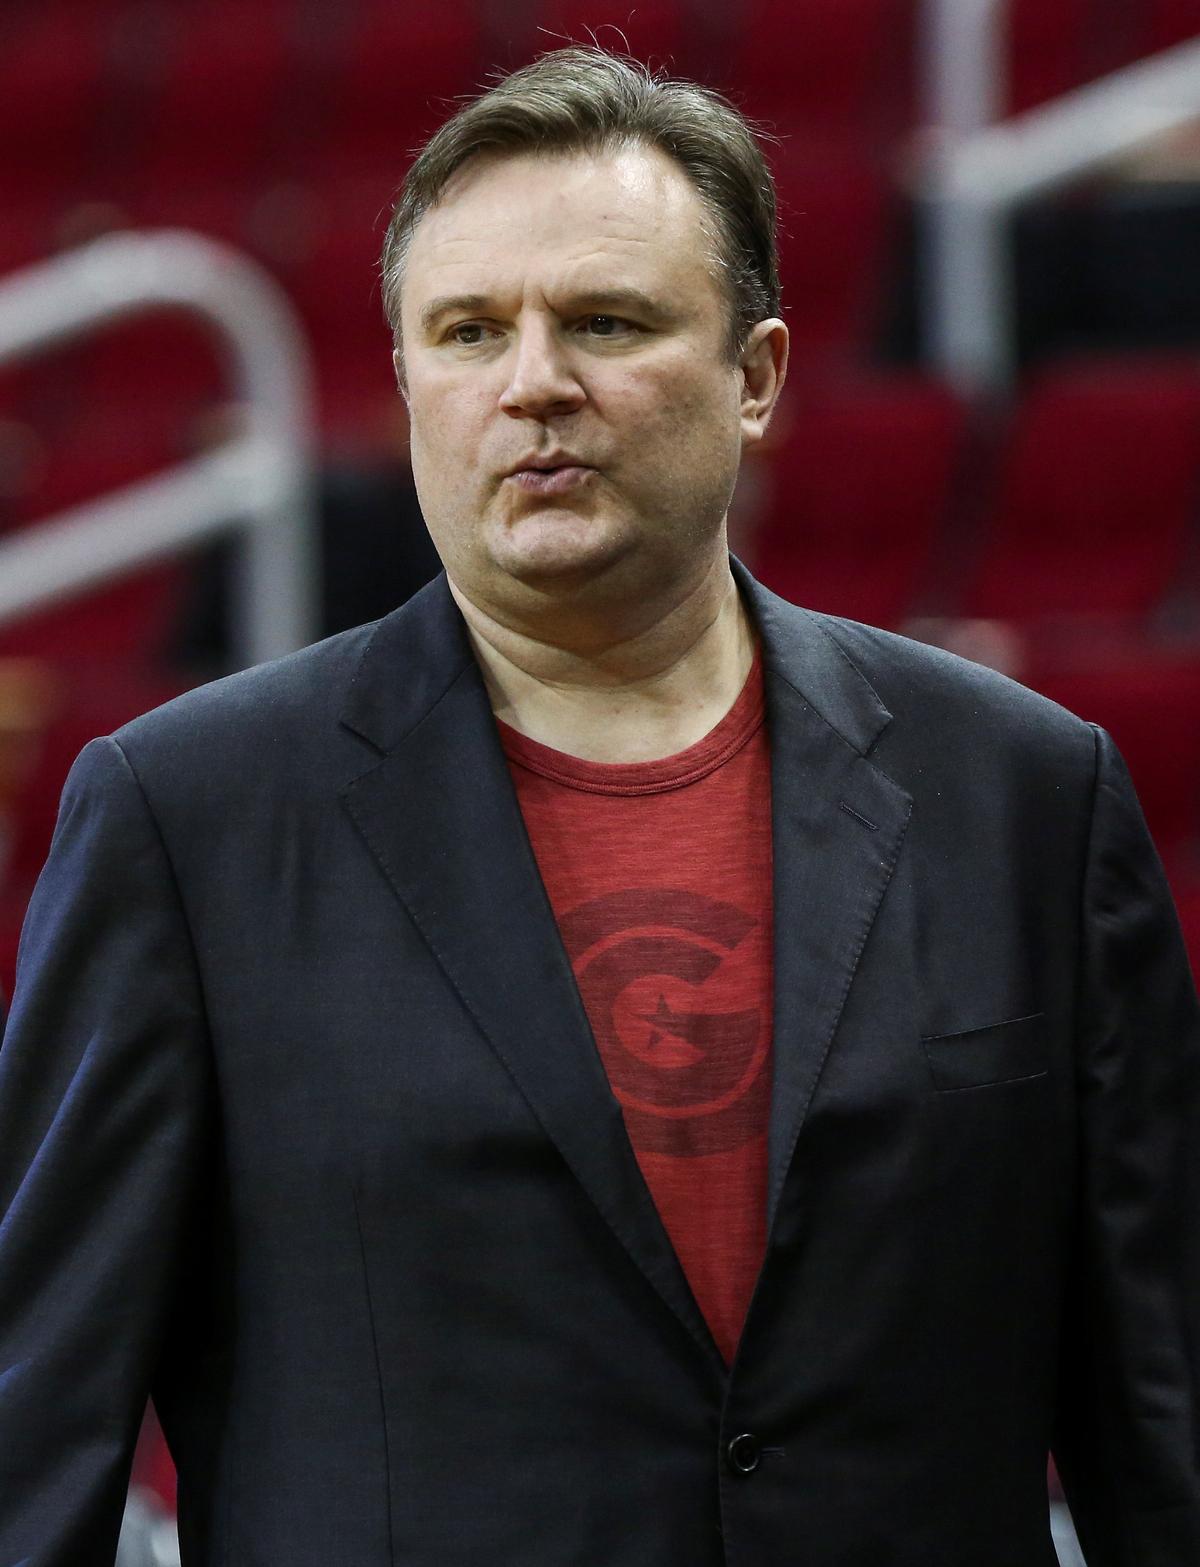 Chinese Businesses Punish Houston Rockets Over Manager's Tweet Supporting Hong Kong Protests